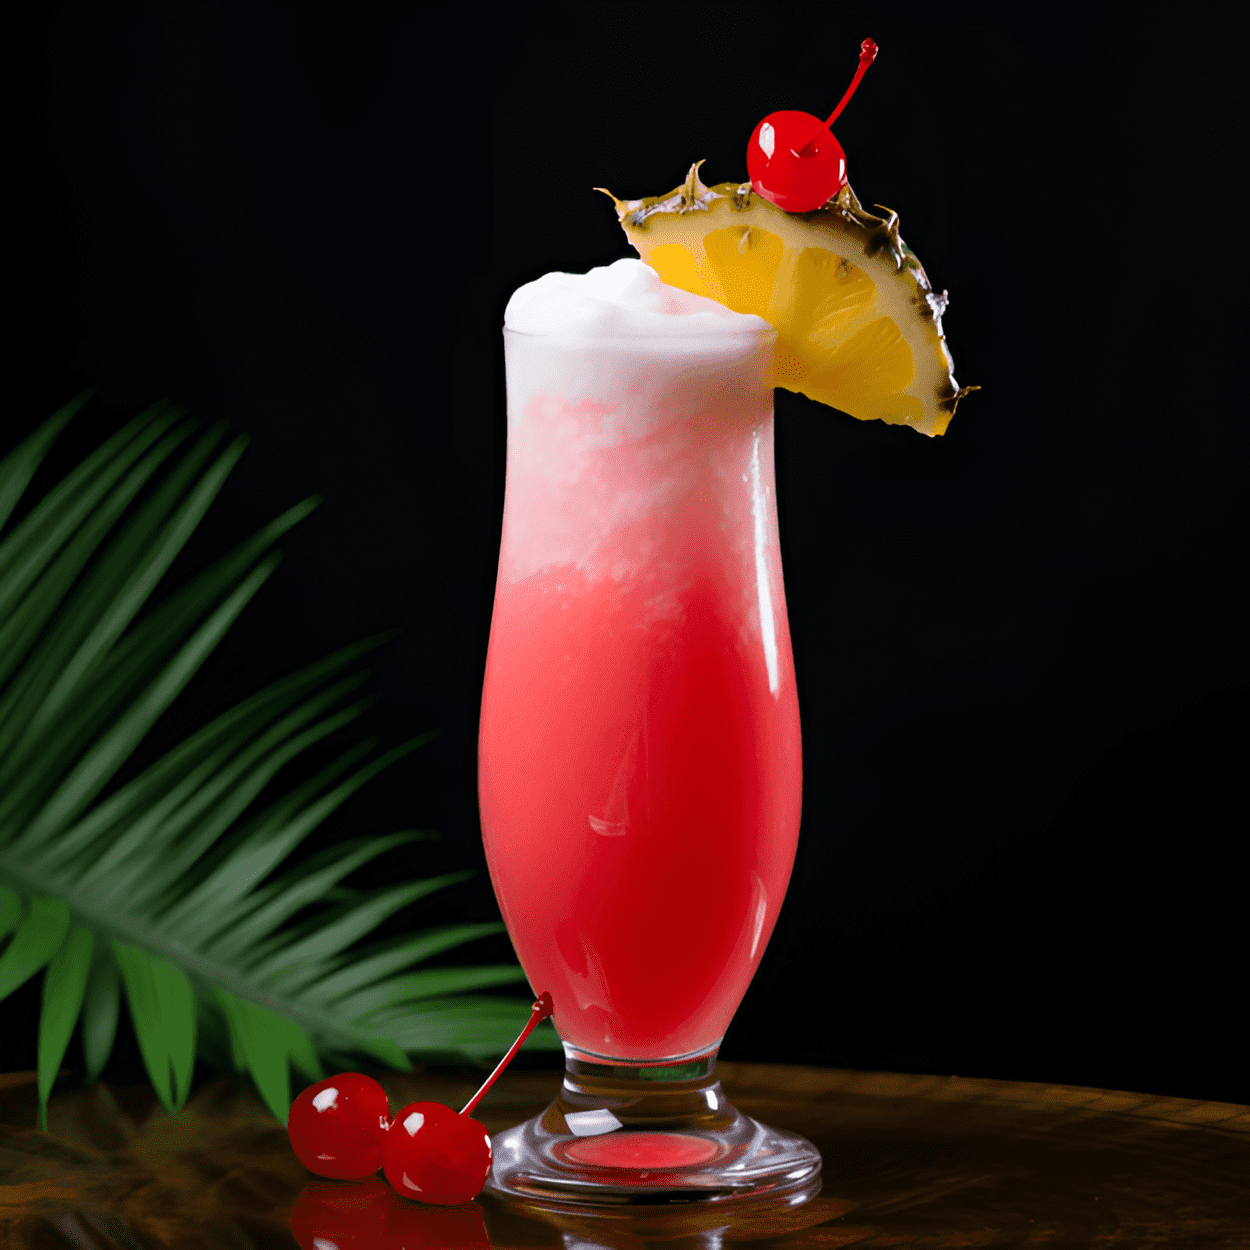 Candyland Cocktail Recipe - The Candyland Cocktail is a sweet, fruity, and vibrant drink. It has a refreshing, tangy twist from the pineapple juice, balanced by the sweetness of the grenadine and the creaminess of the coconut cream. The rum adds a subtle kick, making it a fun and exciting cocktail.